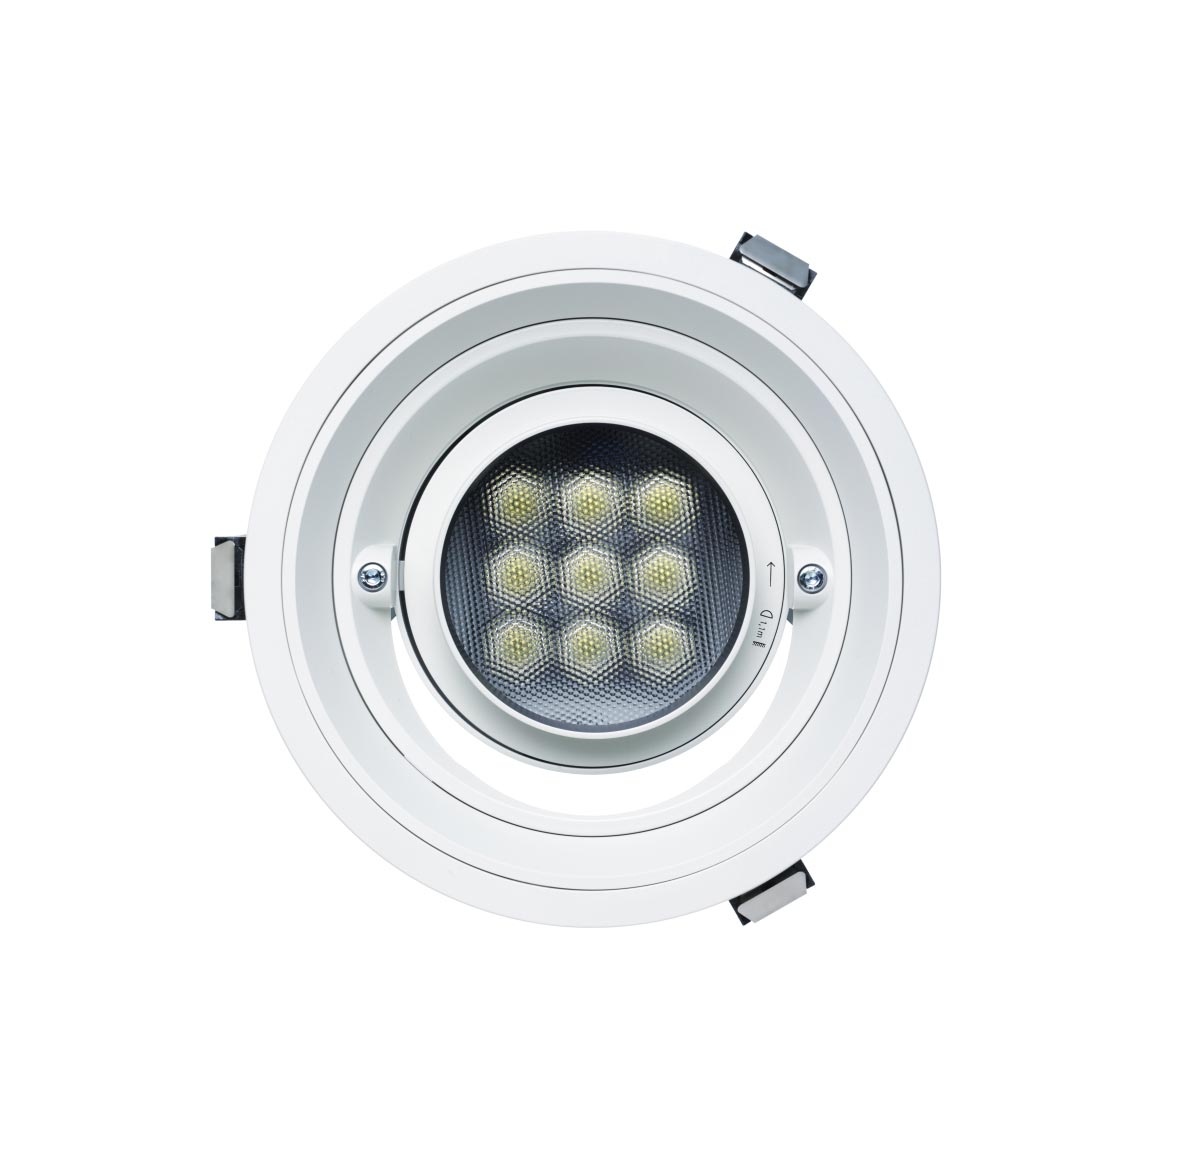 Quintessence Recessed Spotlight With Regressed Mounting Tray LED 18W 1890lm 3000K Warm White Dimmable